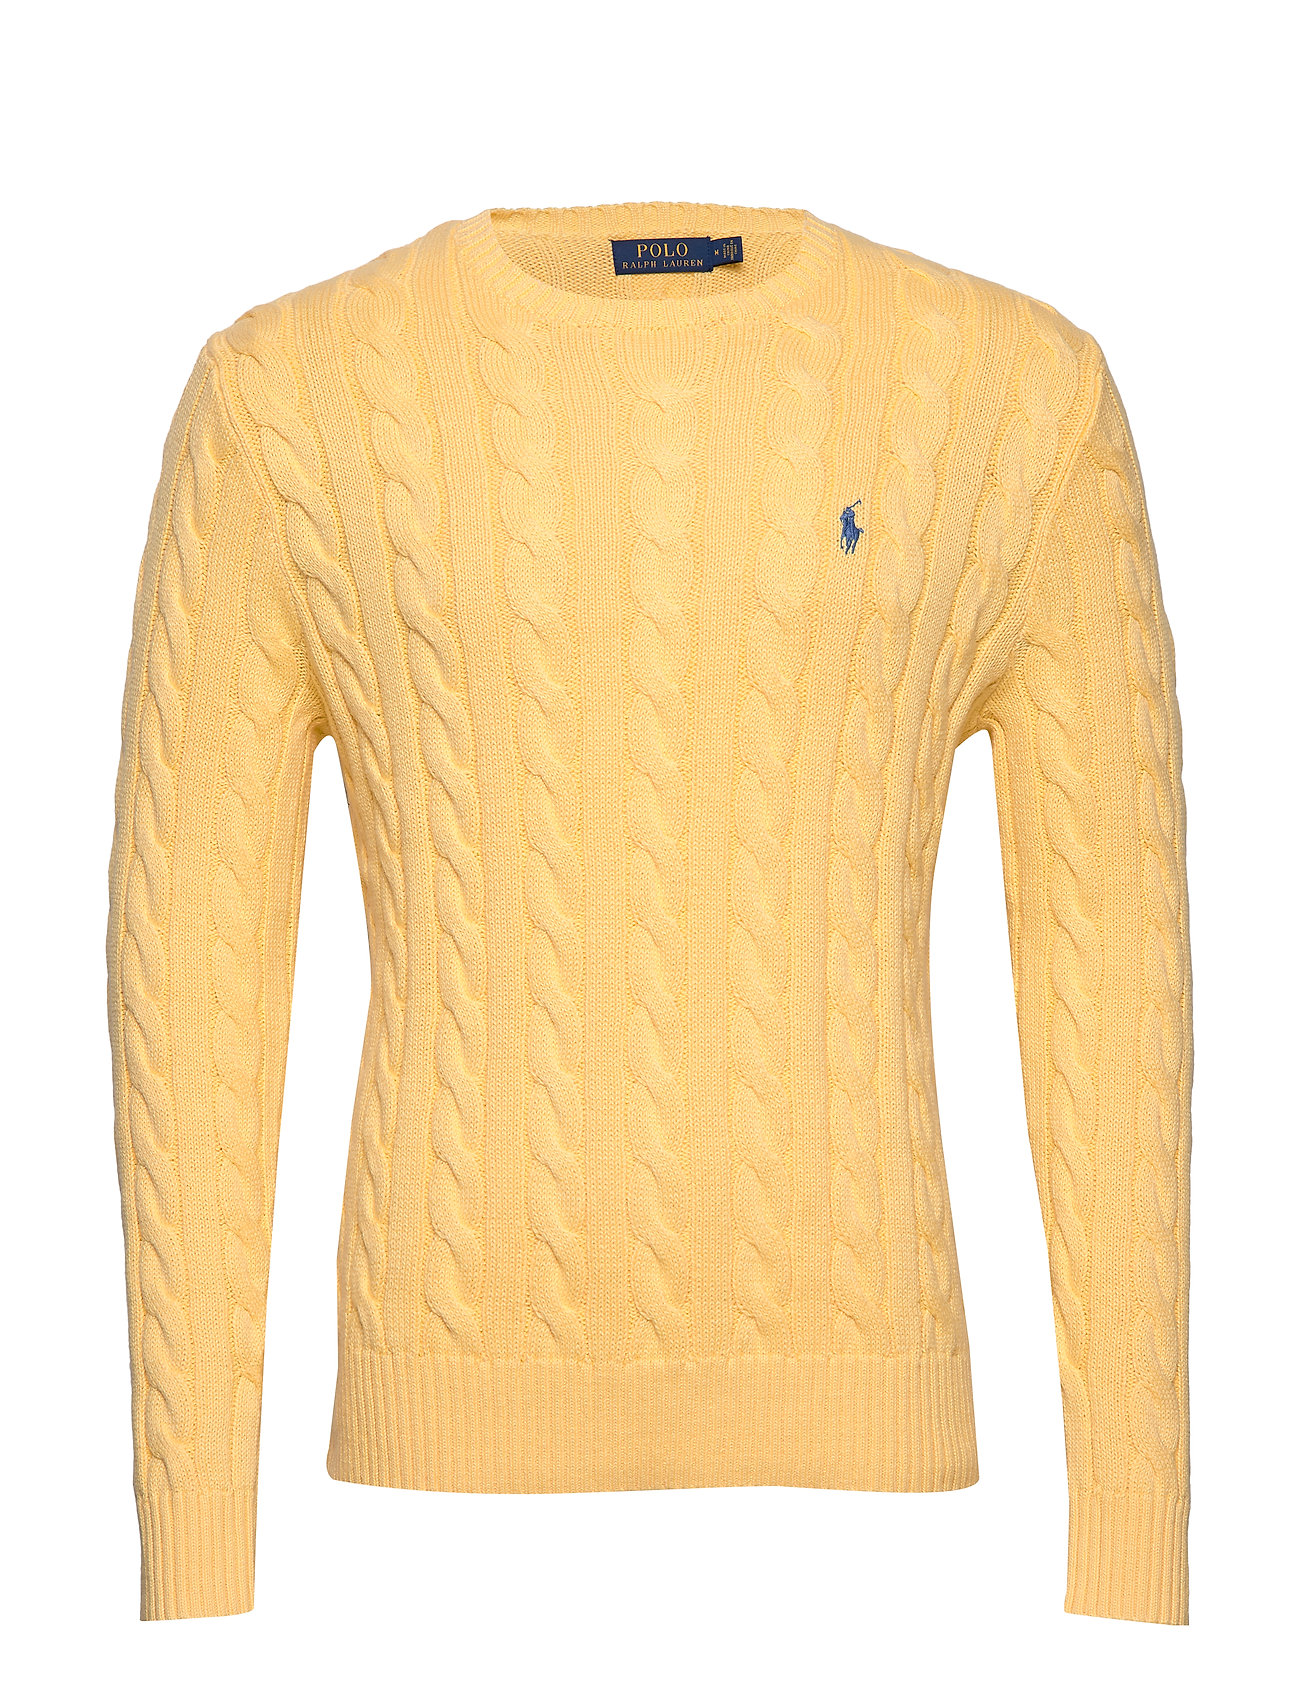 ralph lauren yellow cable knit sweater